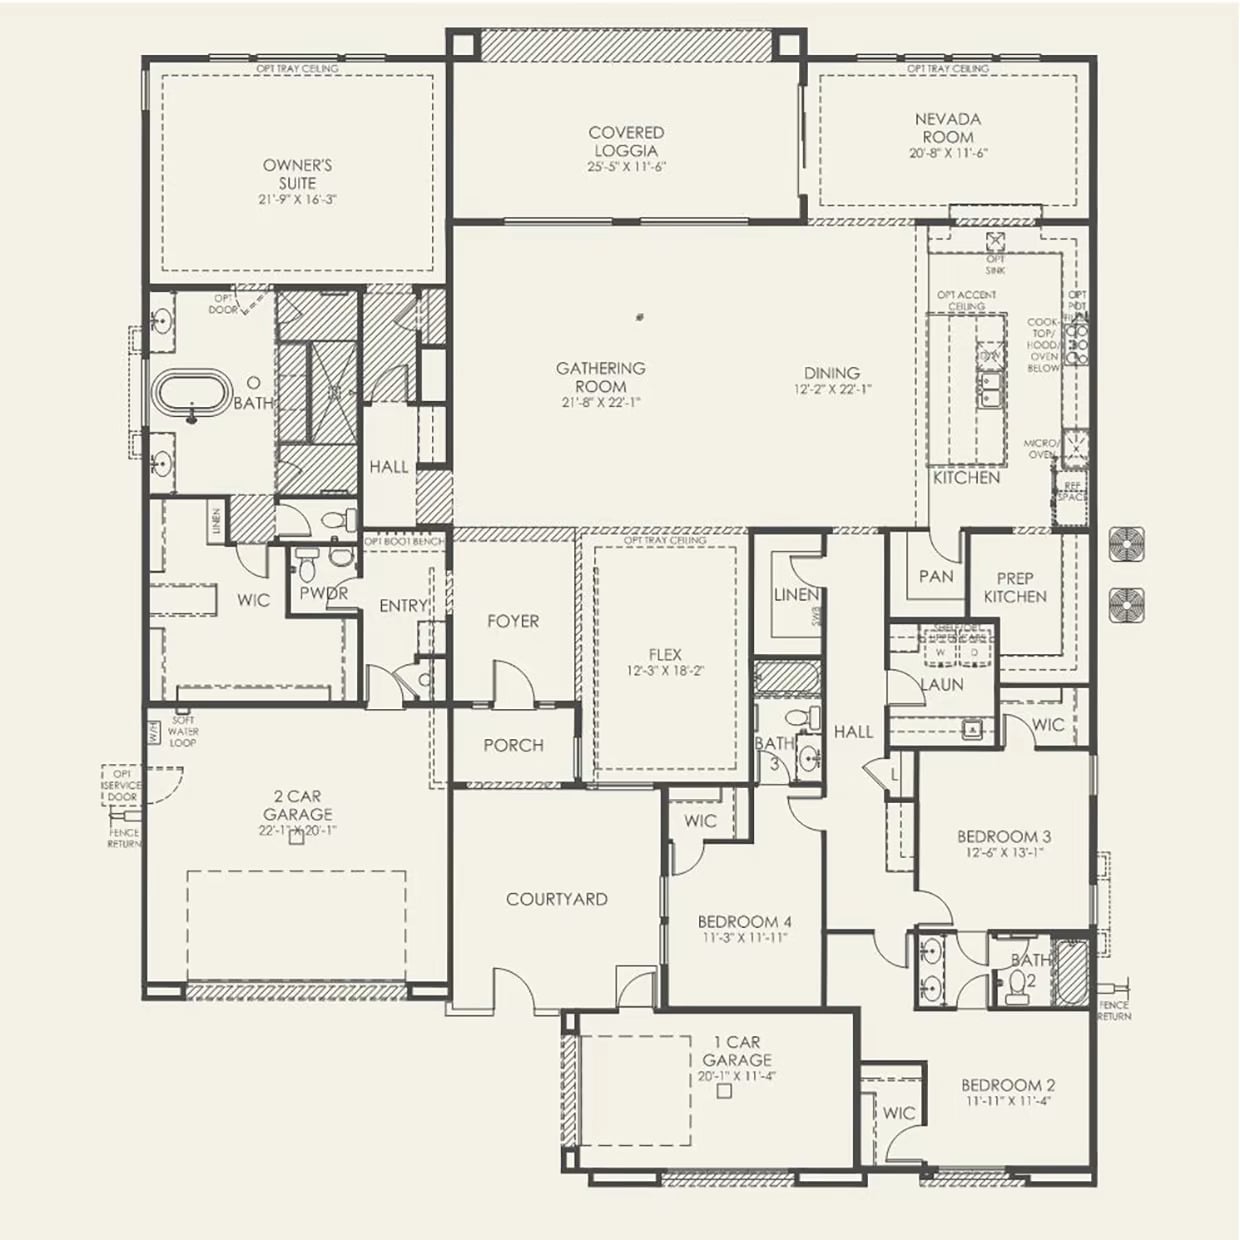 Floorplan of Luminary Model at Ascension by Pulte Homes